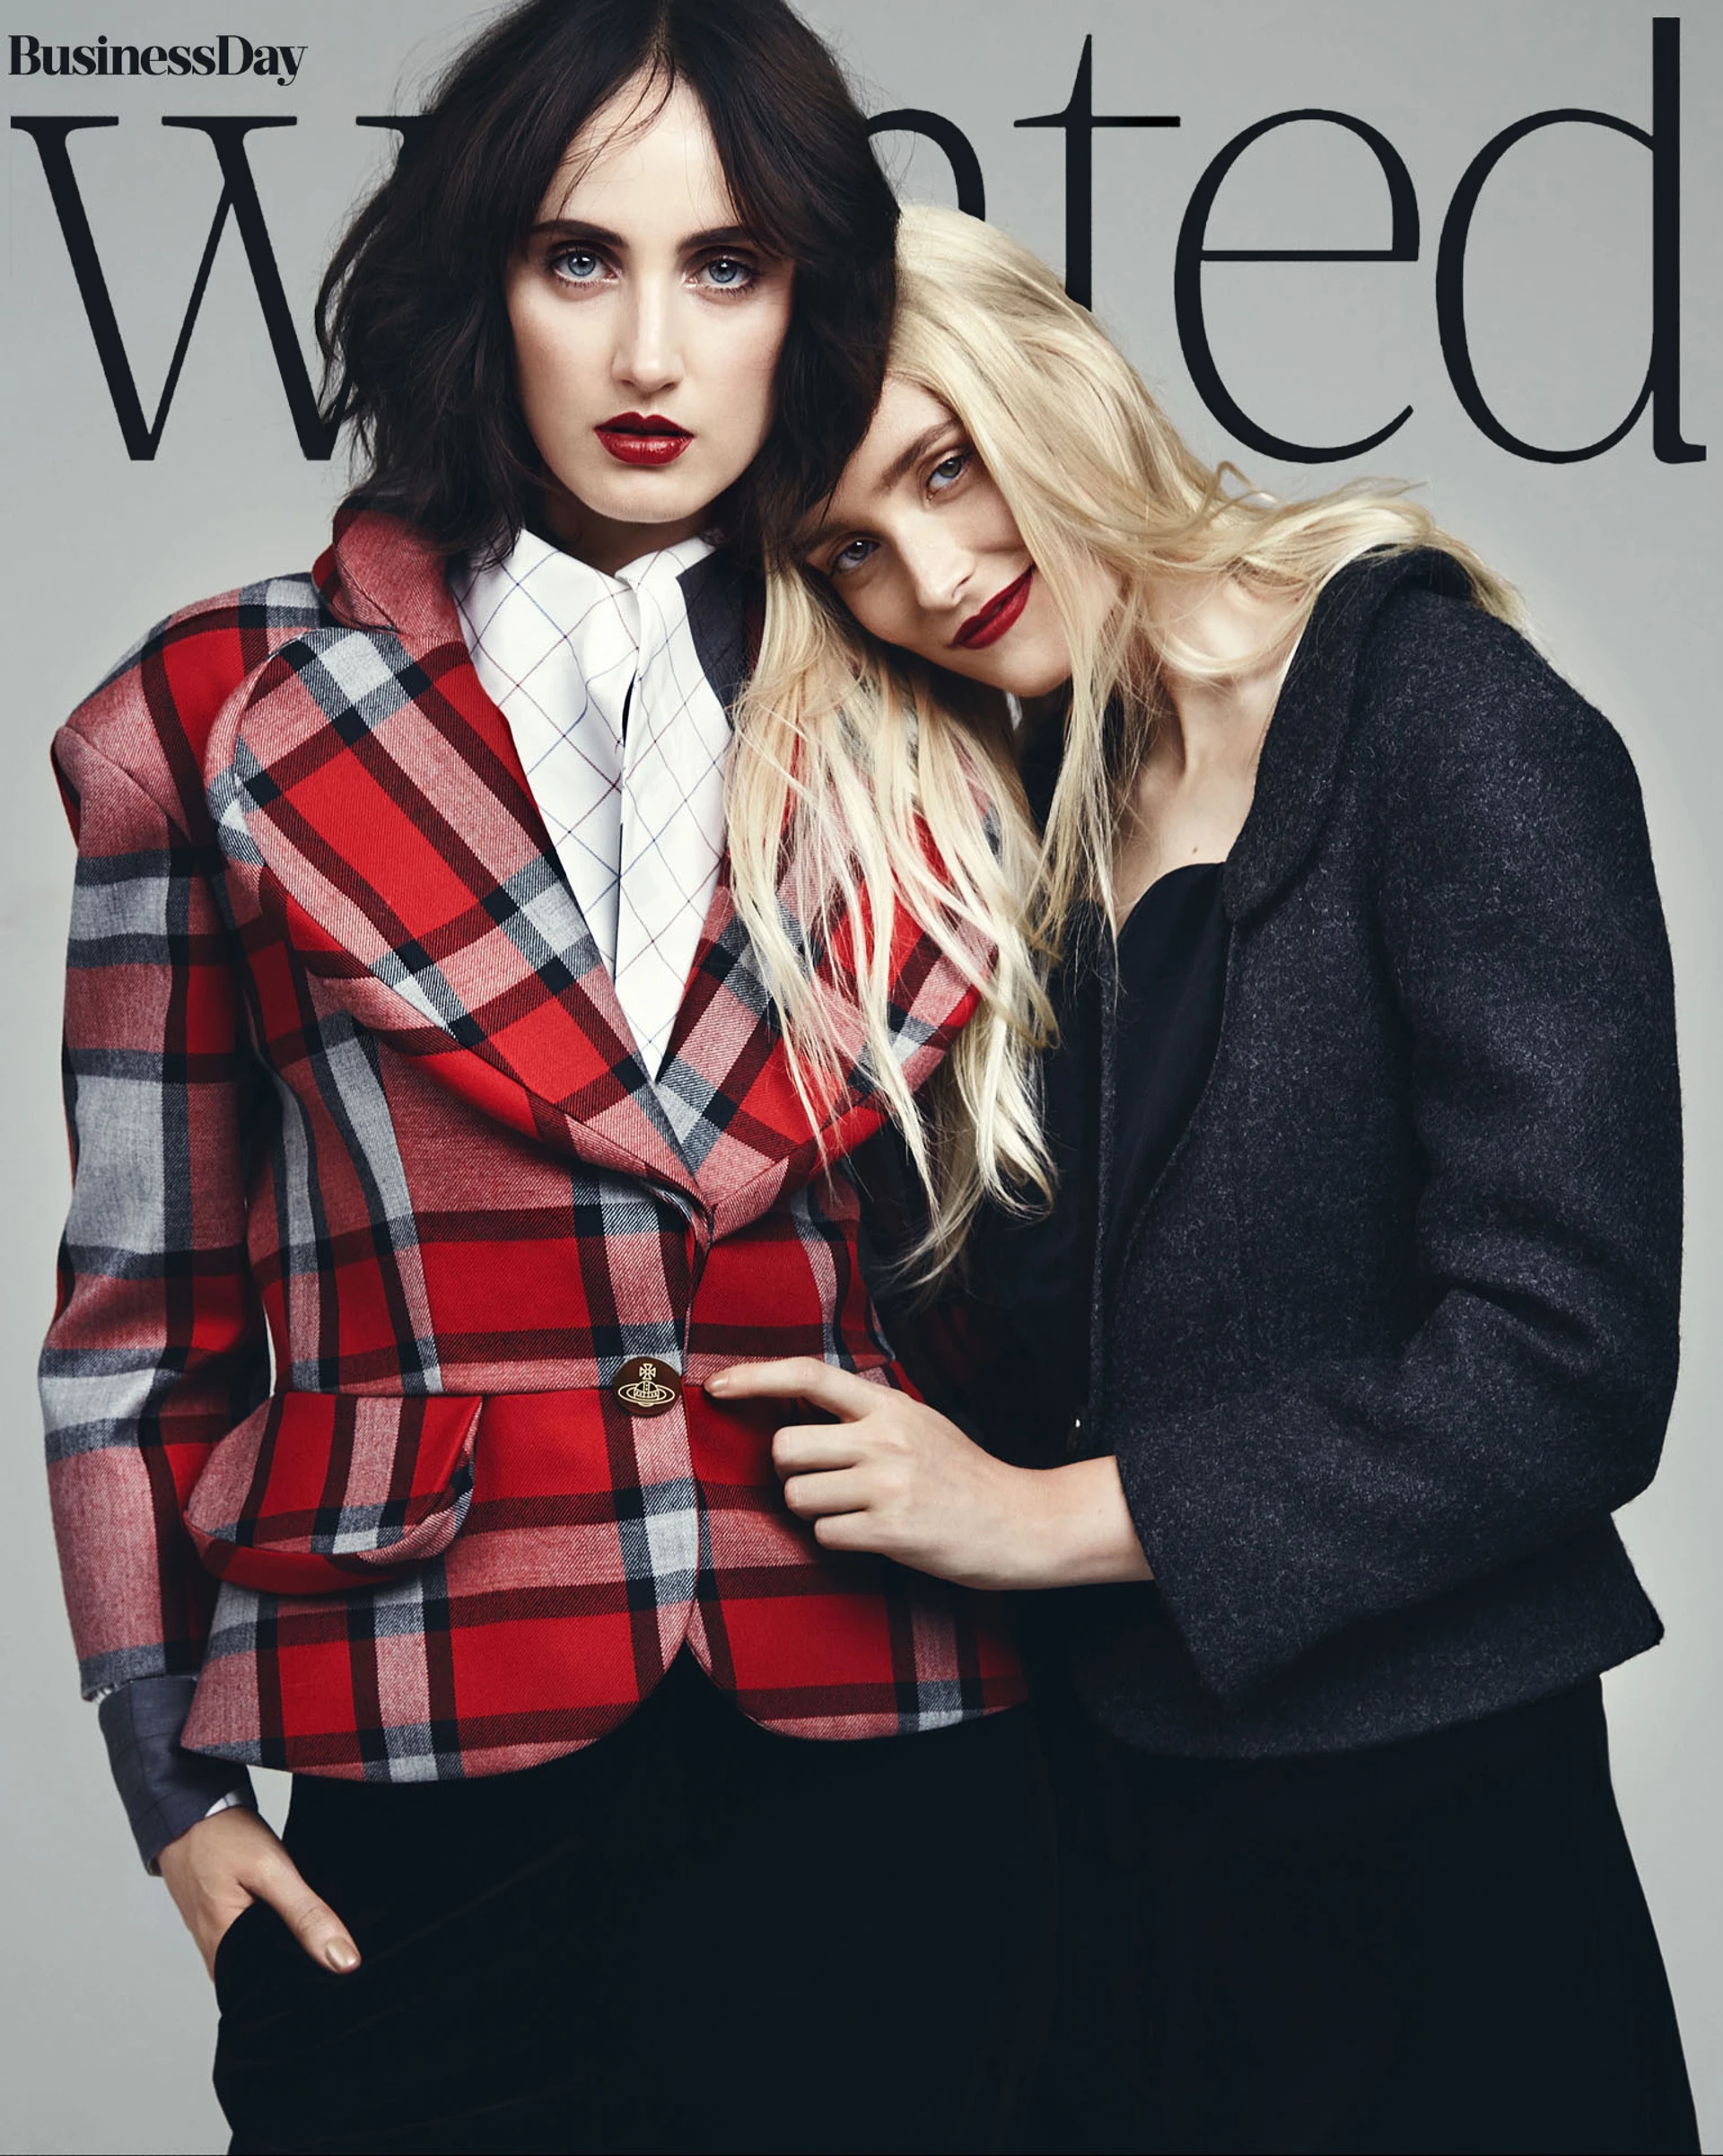 Two models, one with dark hair wearing a red plaid blazer and white shirt, and the other with blonde hair in a black coat, posing intimately for BusinessDay Wanted magazine cover.